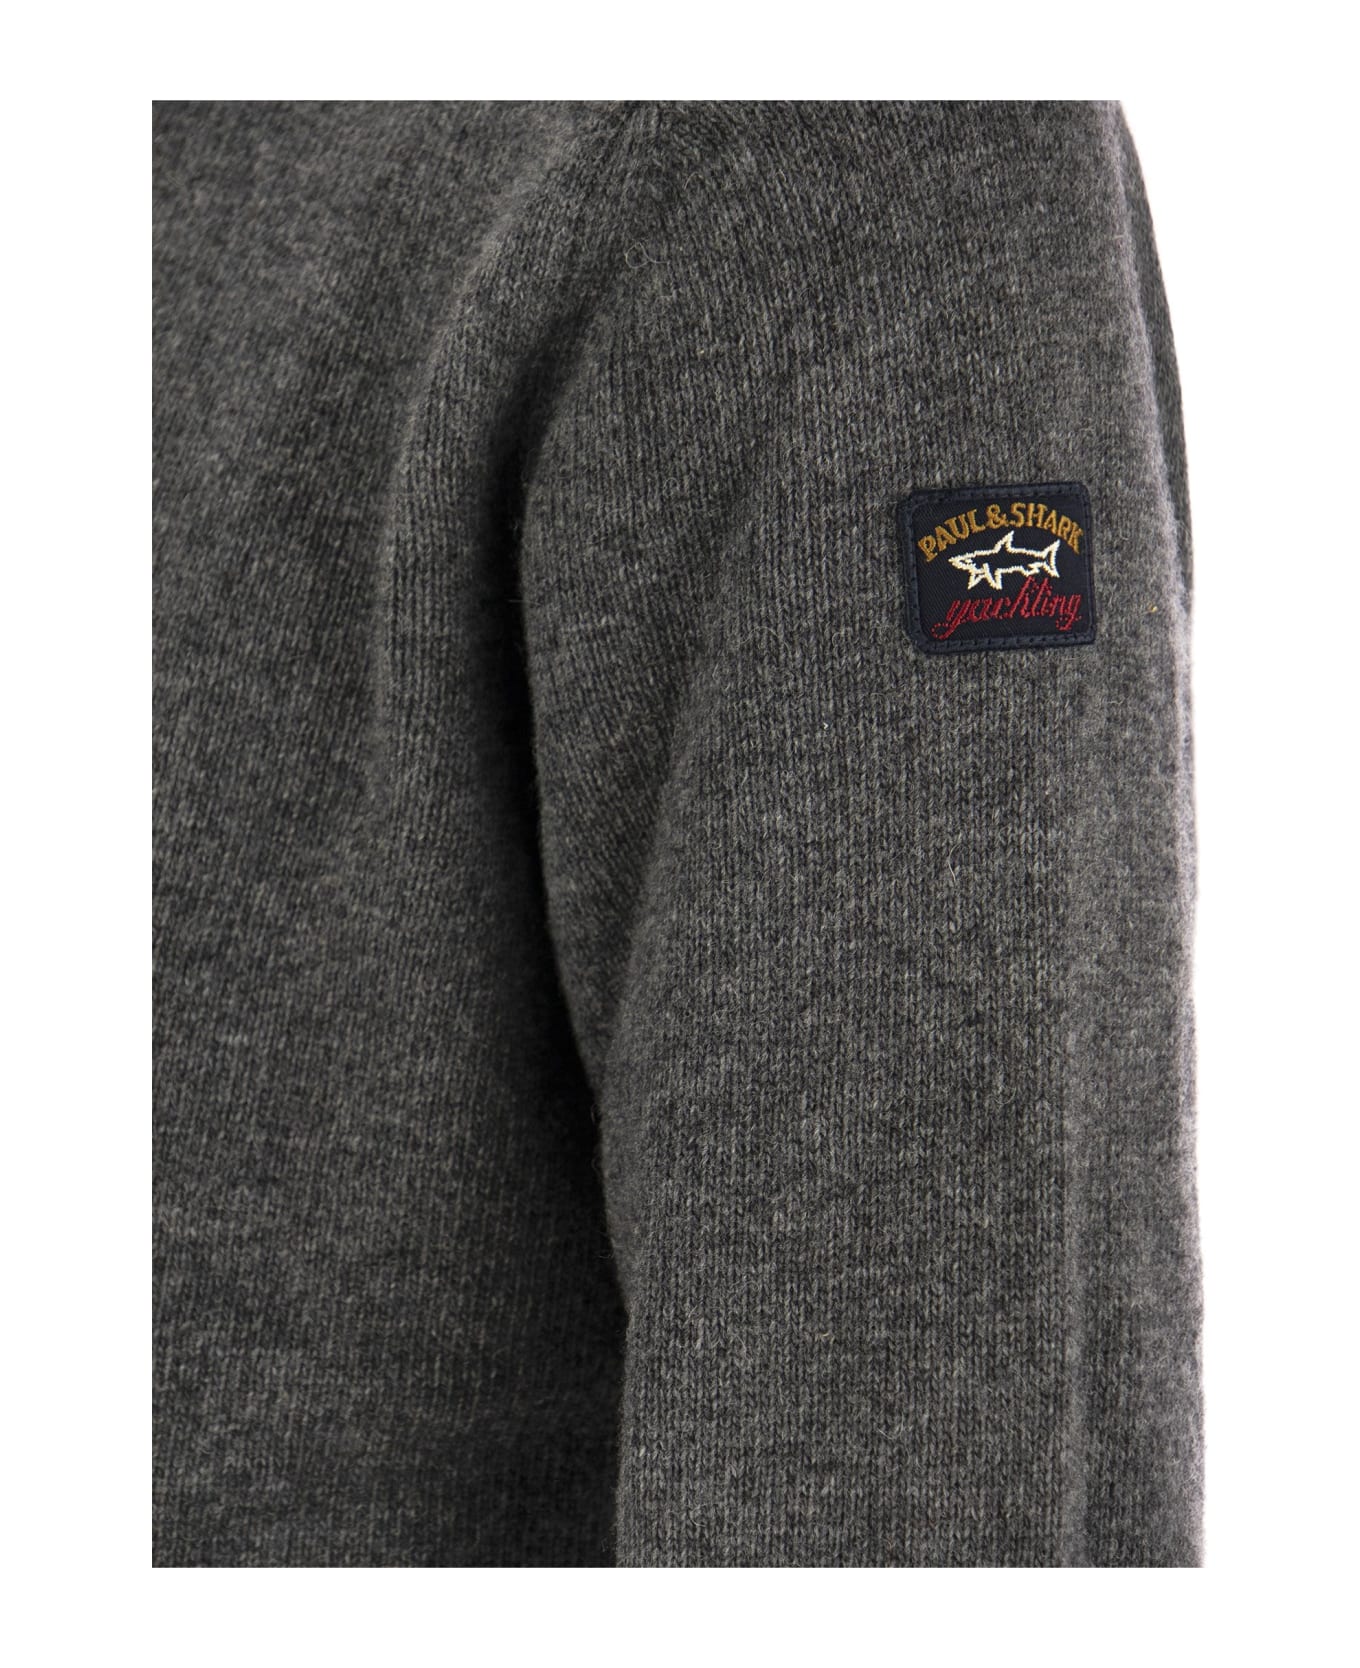 Paul&Shark Wool Crew Neck With Arm Patch - Grey ニットウェア